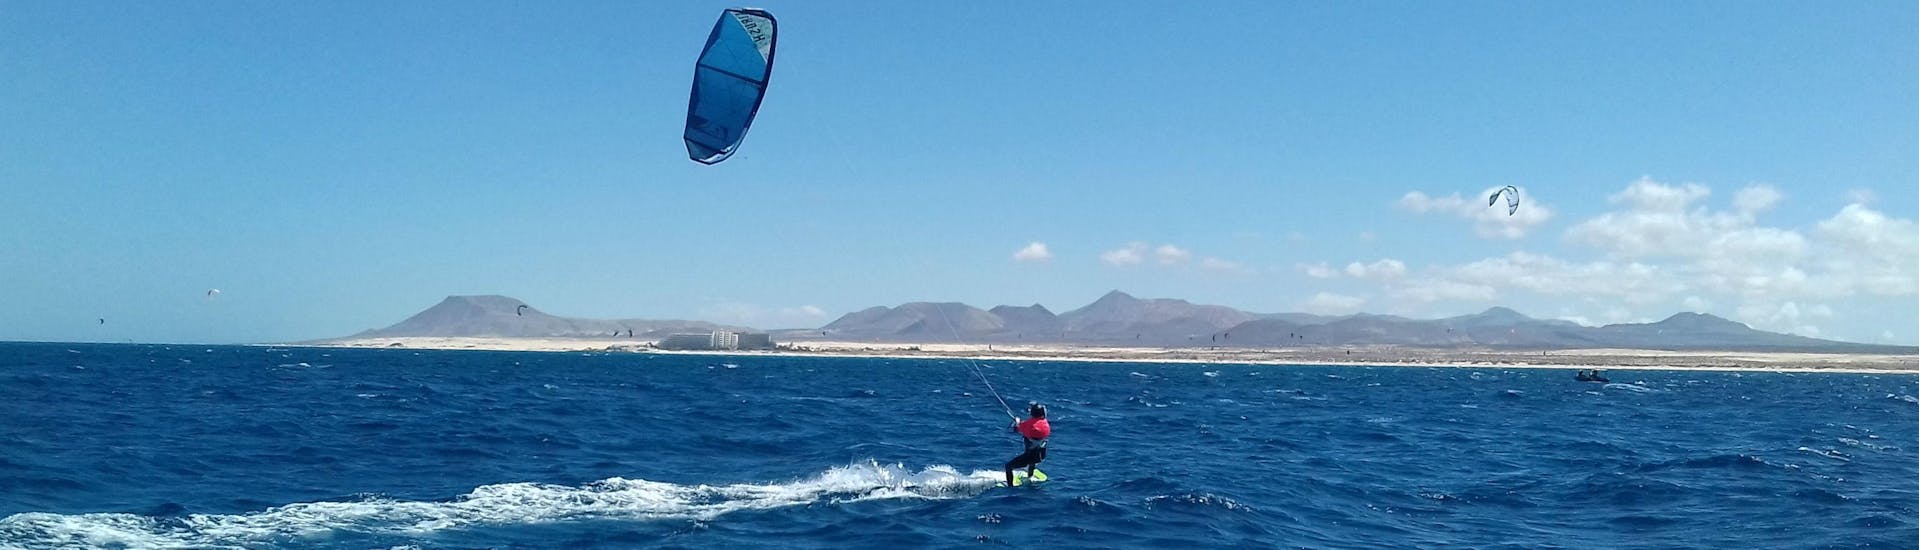 private-kitesurfing-for-teens-and-adults-all-levels-cbcm-fuerteventura-hero